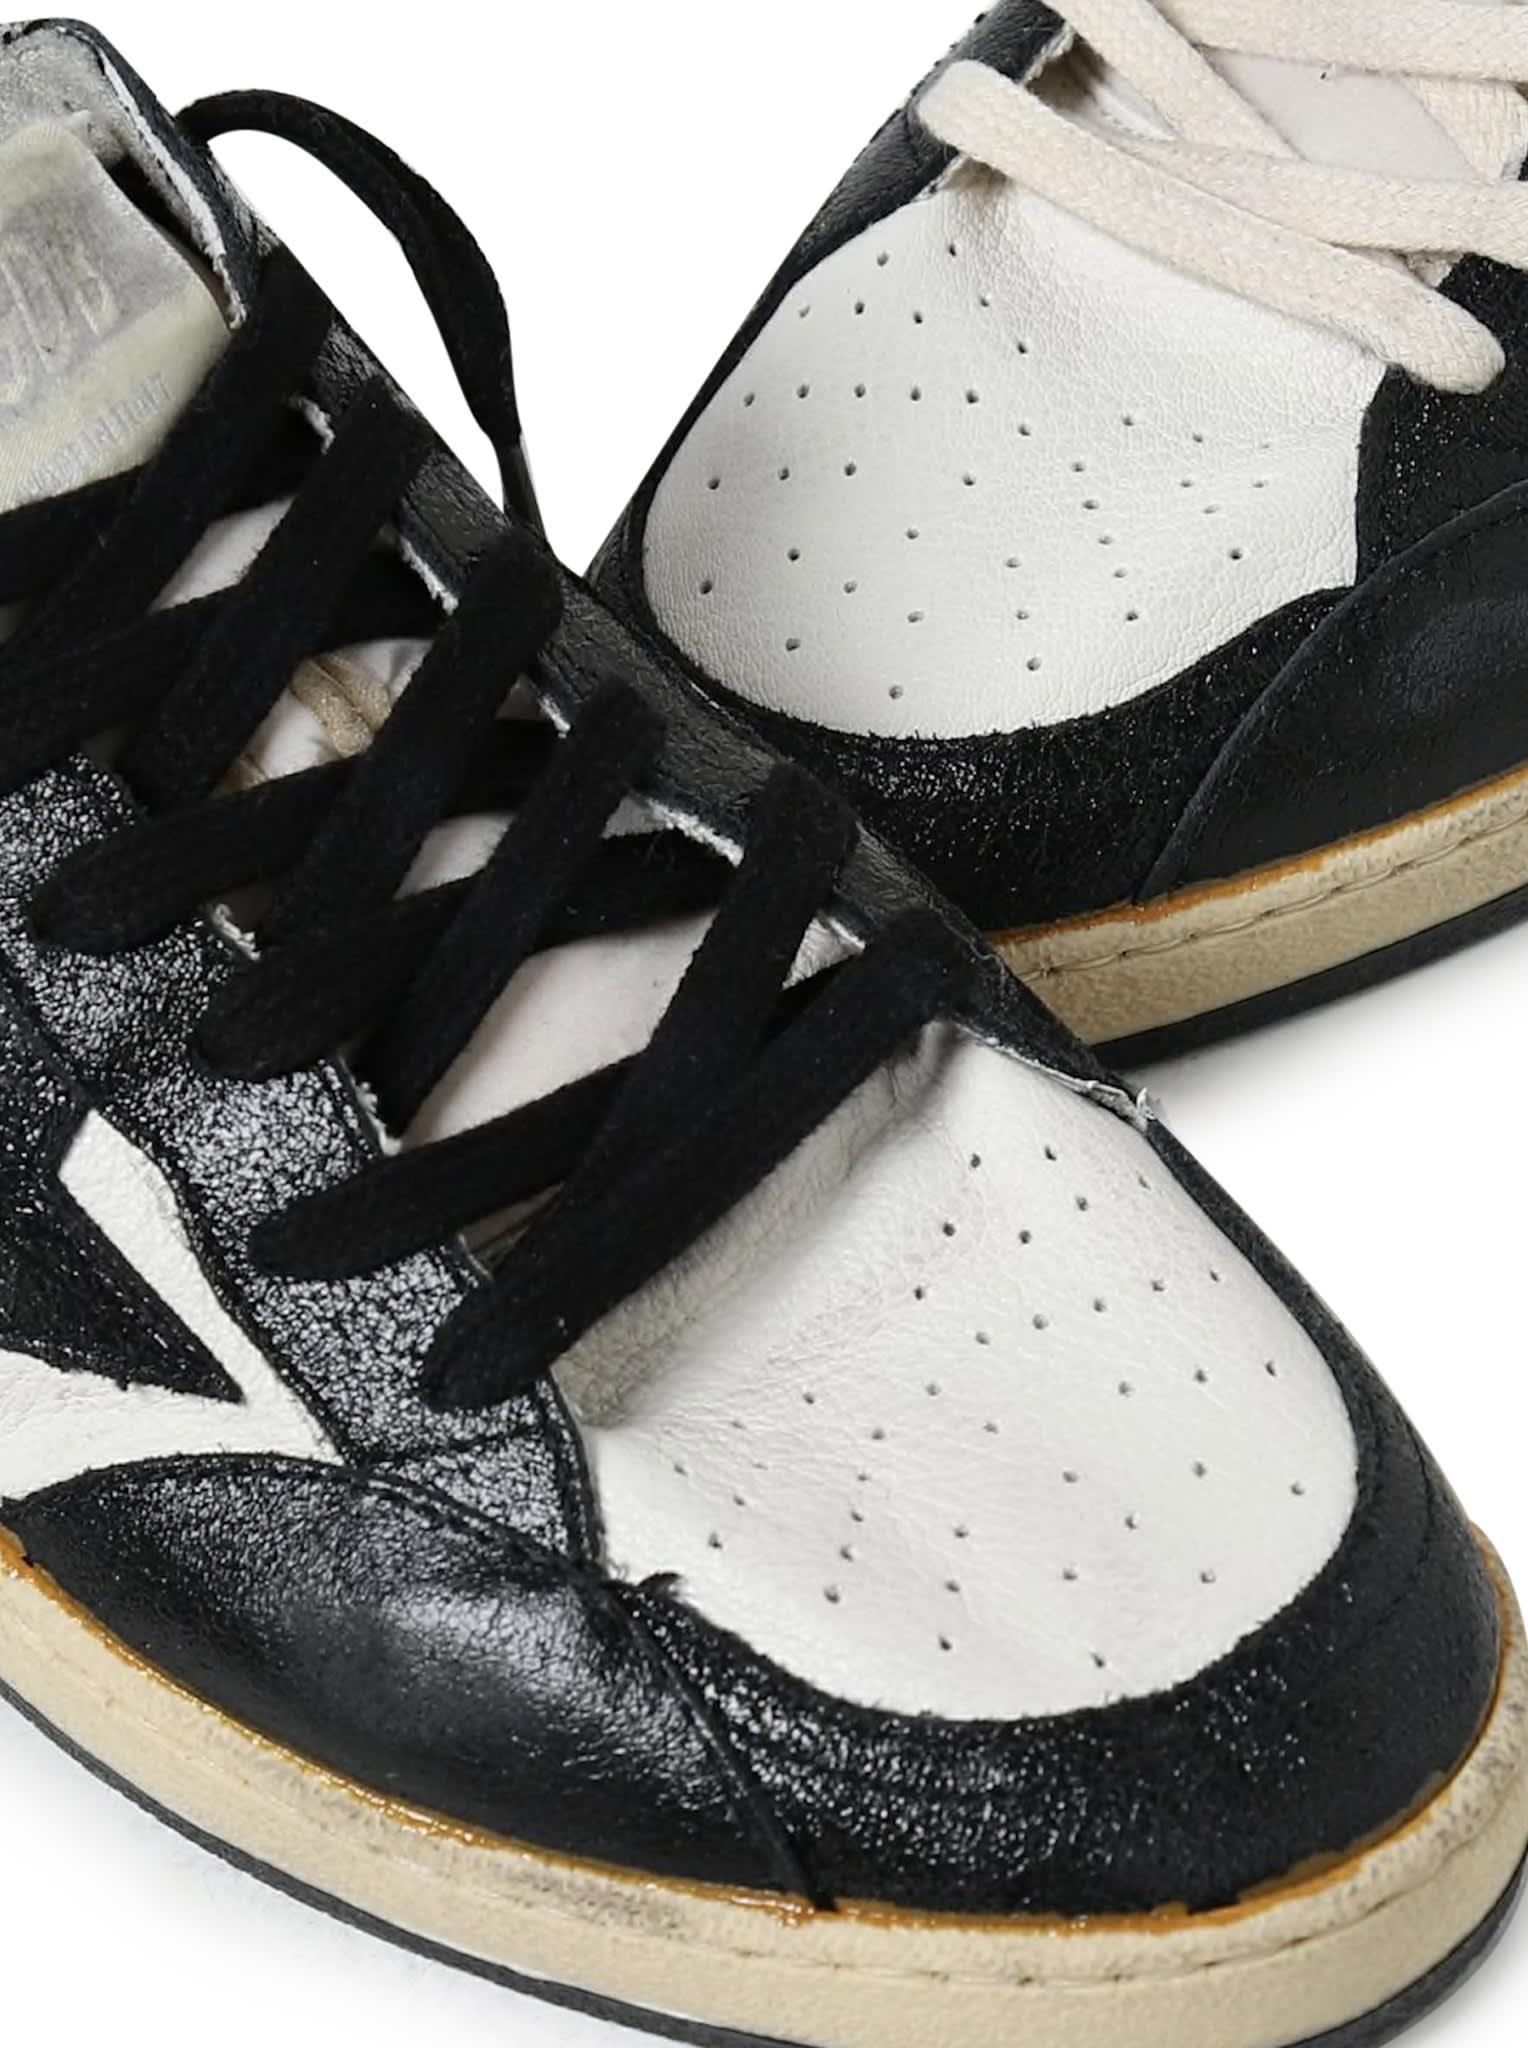 Shop Golden Goose Ballstar Nappa Upper Leather Toe Star And Spur Nylon Tongue In White Black Grey